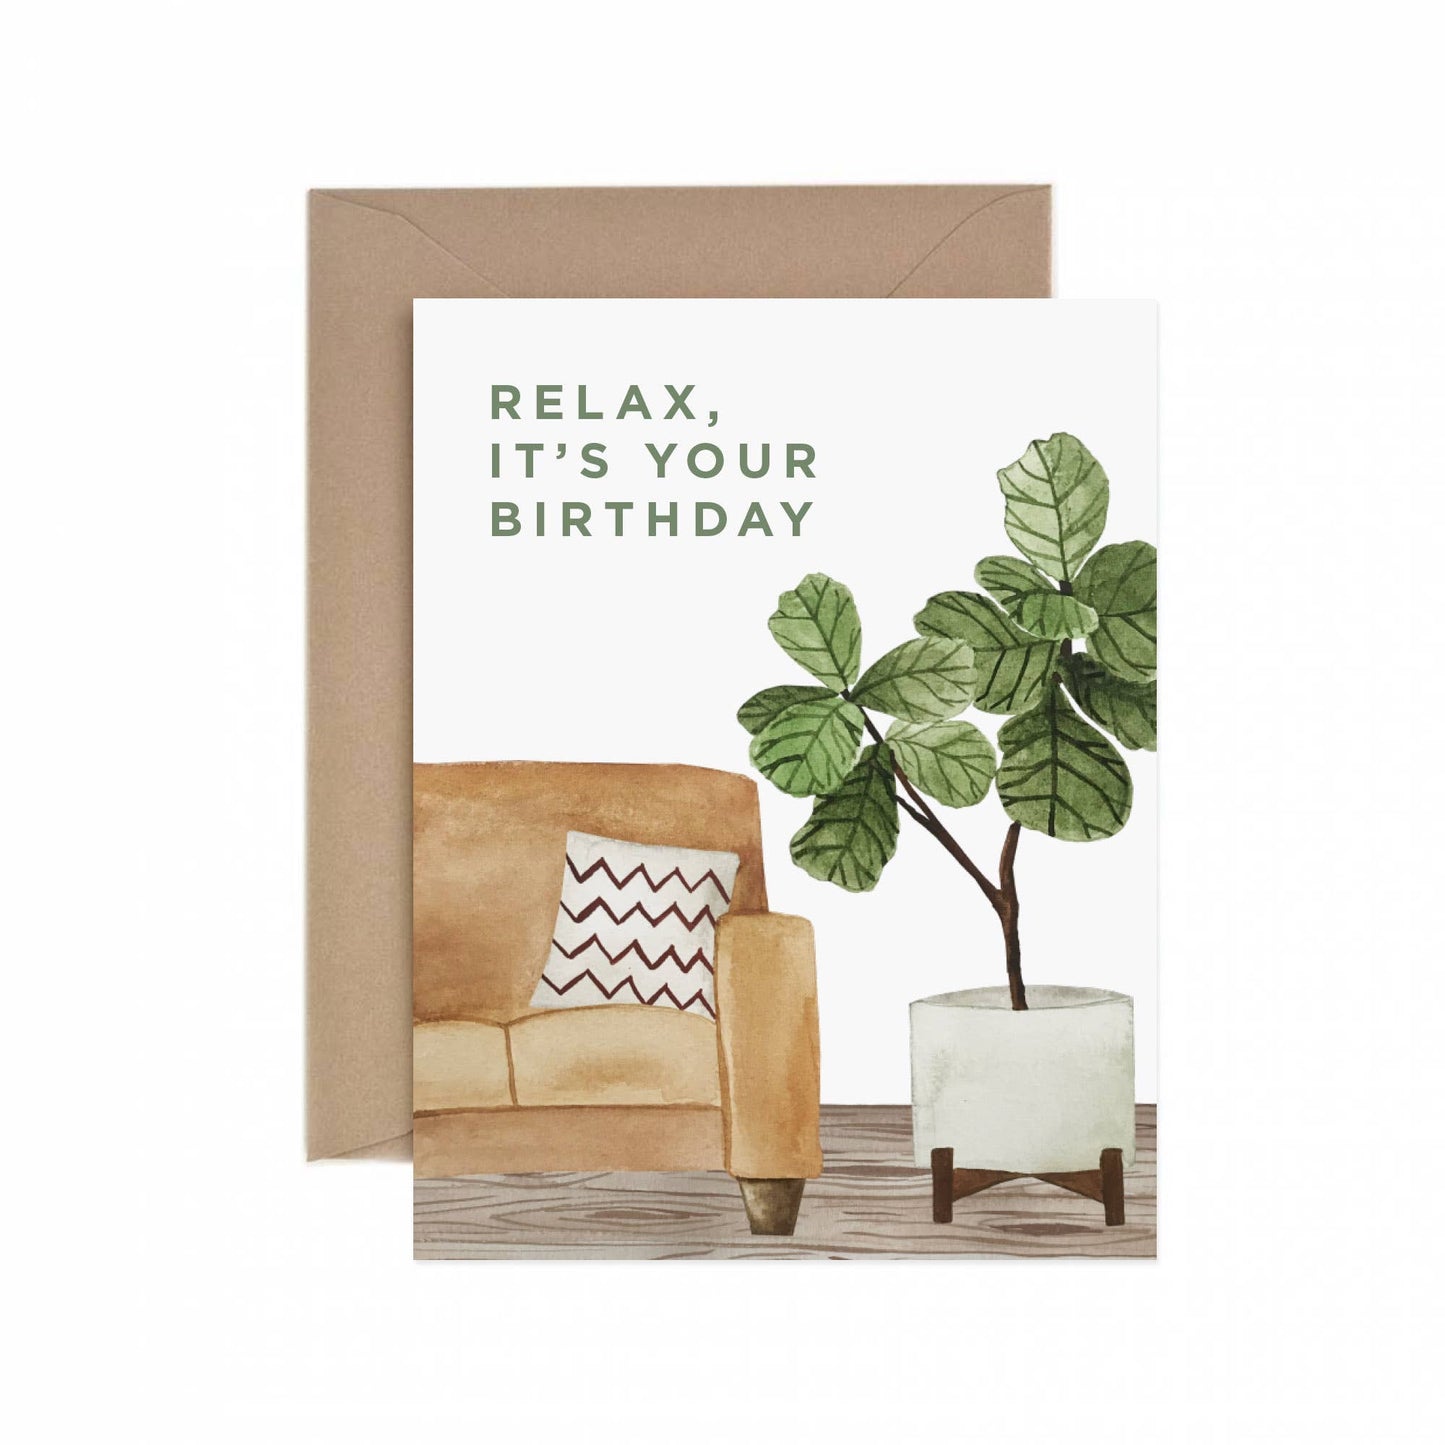 Relax, It’s Your Birthday Card